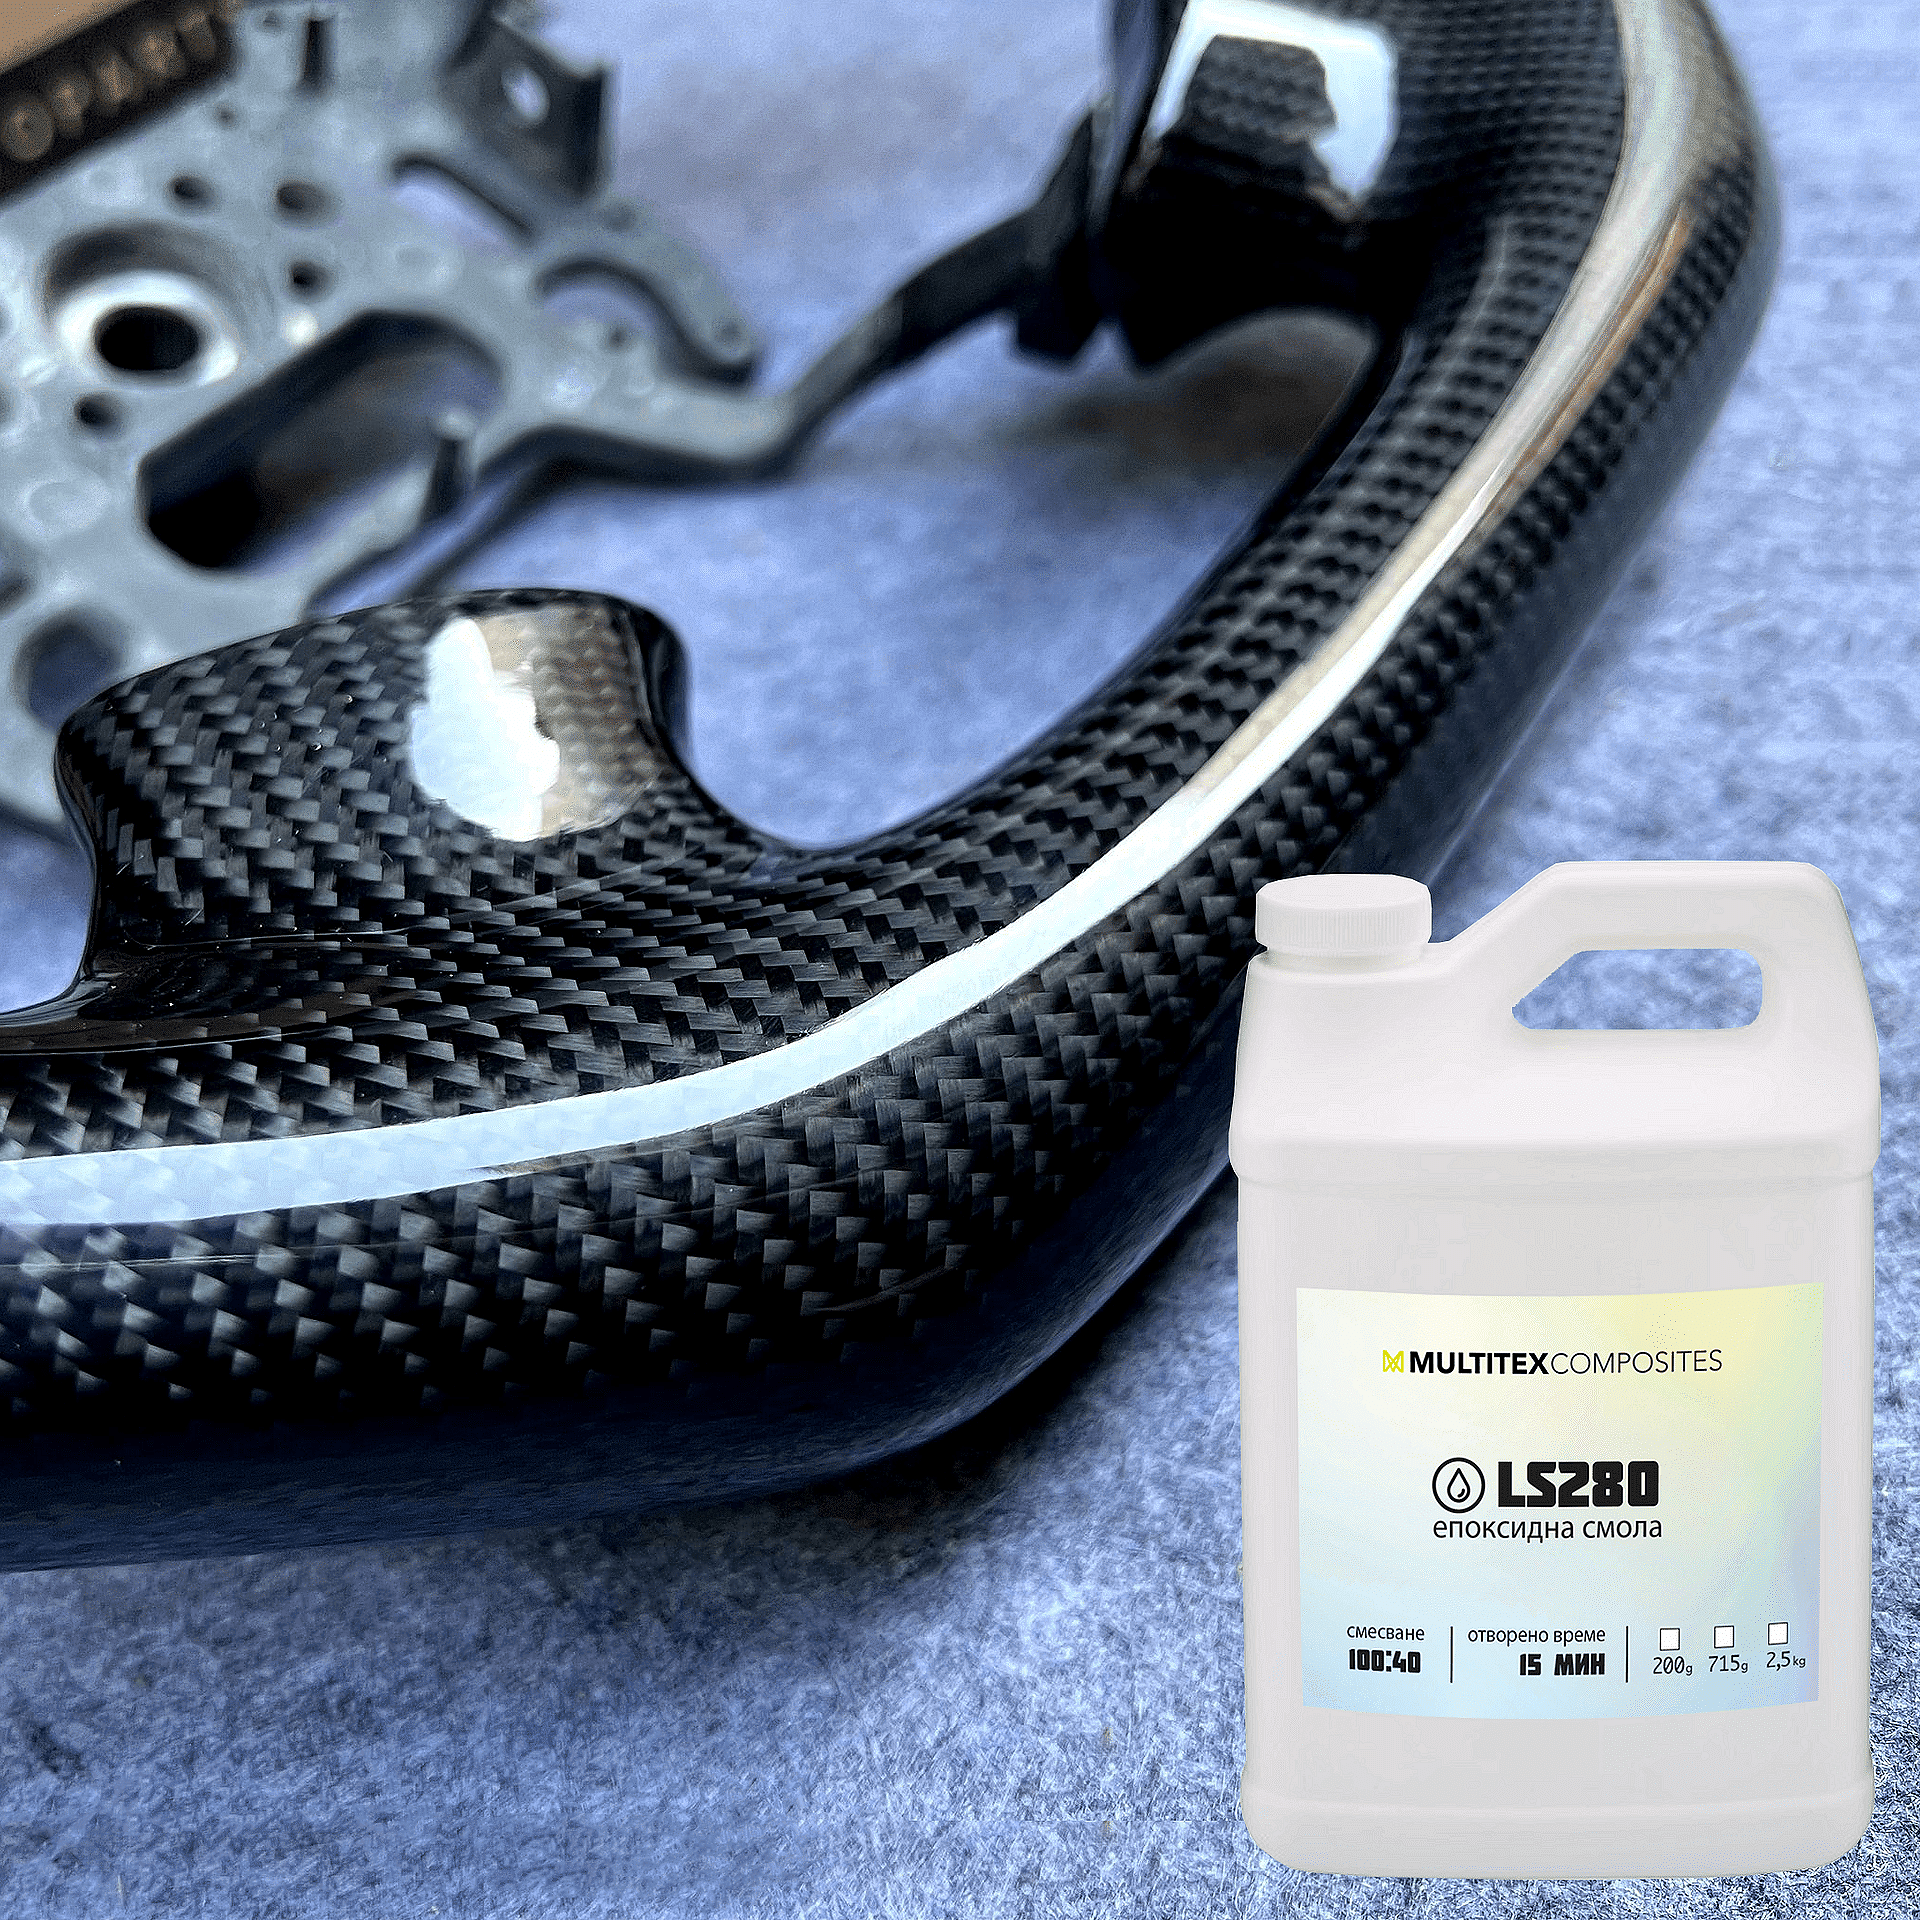 Fast curing epoxy resin LS280™